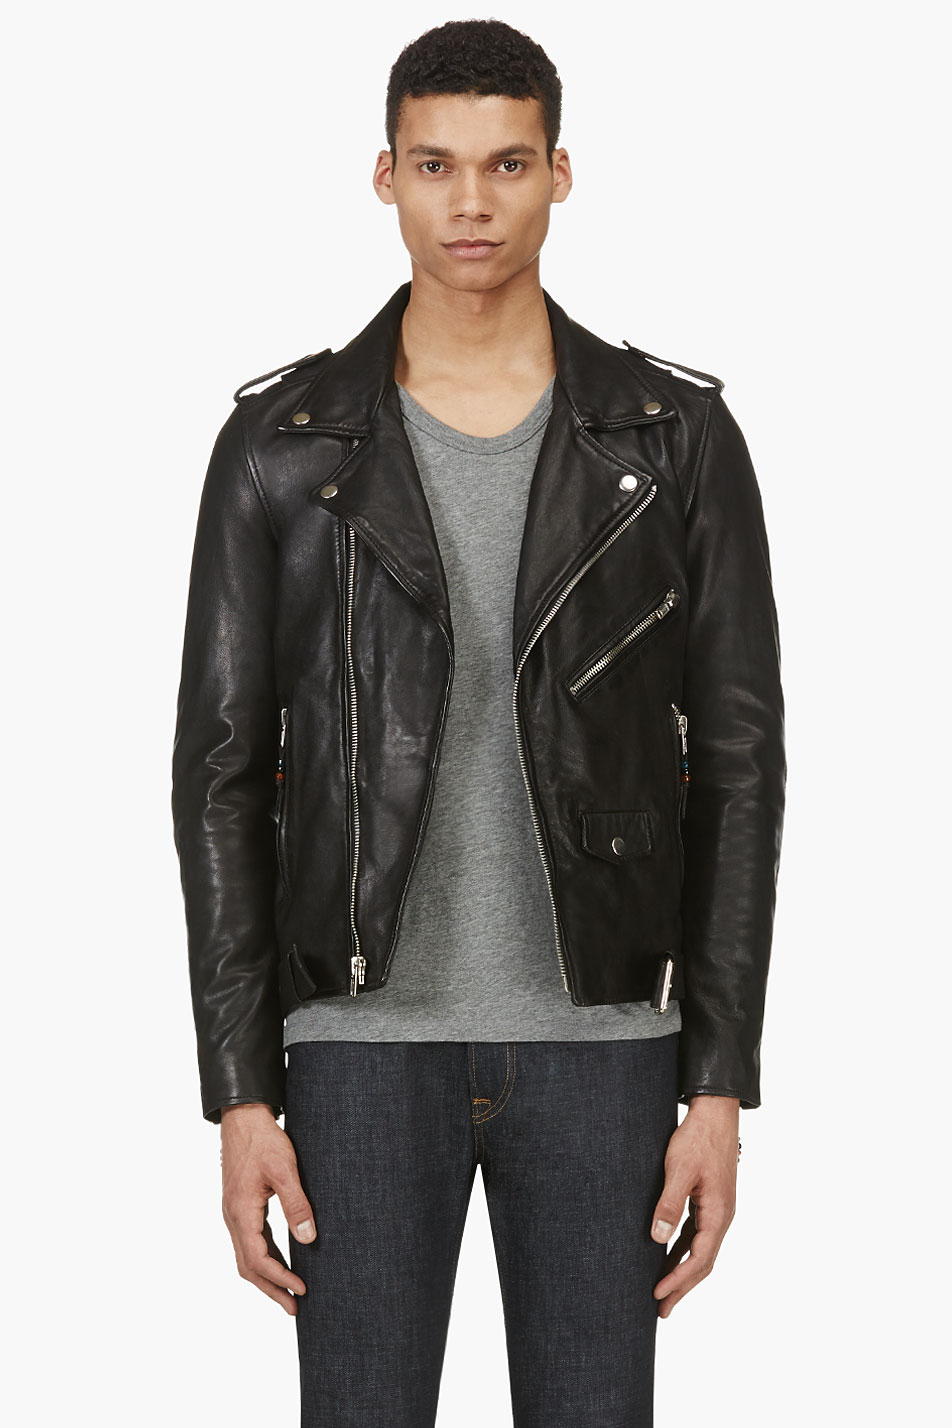 Lyst - Blk Dnm Black Leather Iconic Freedom Motorcycle Jacket in Black ...